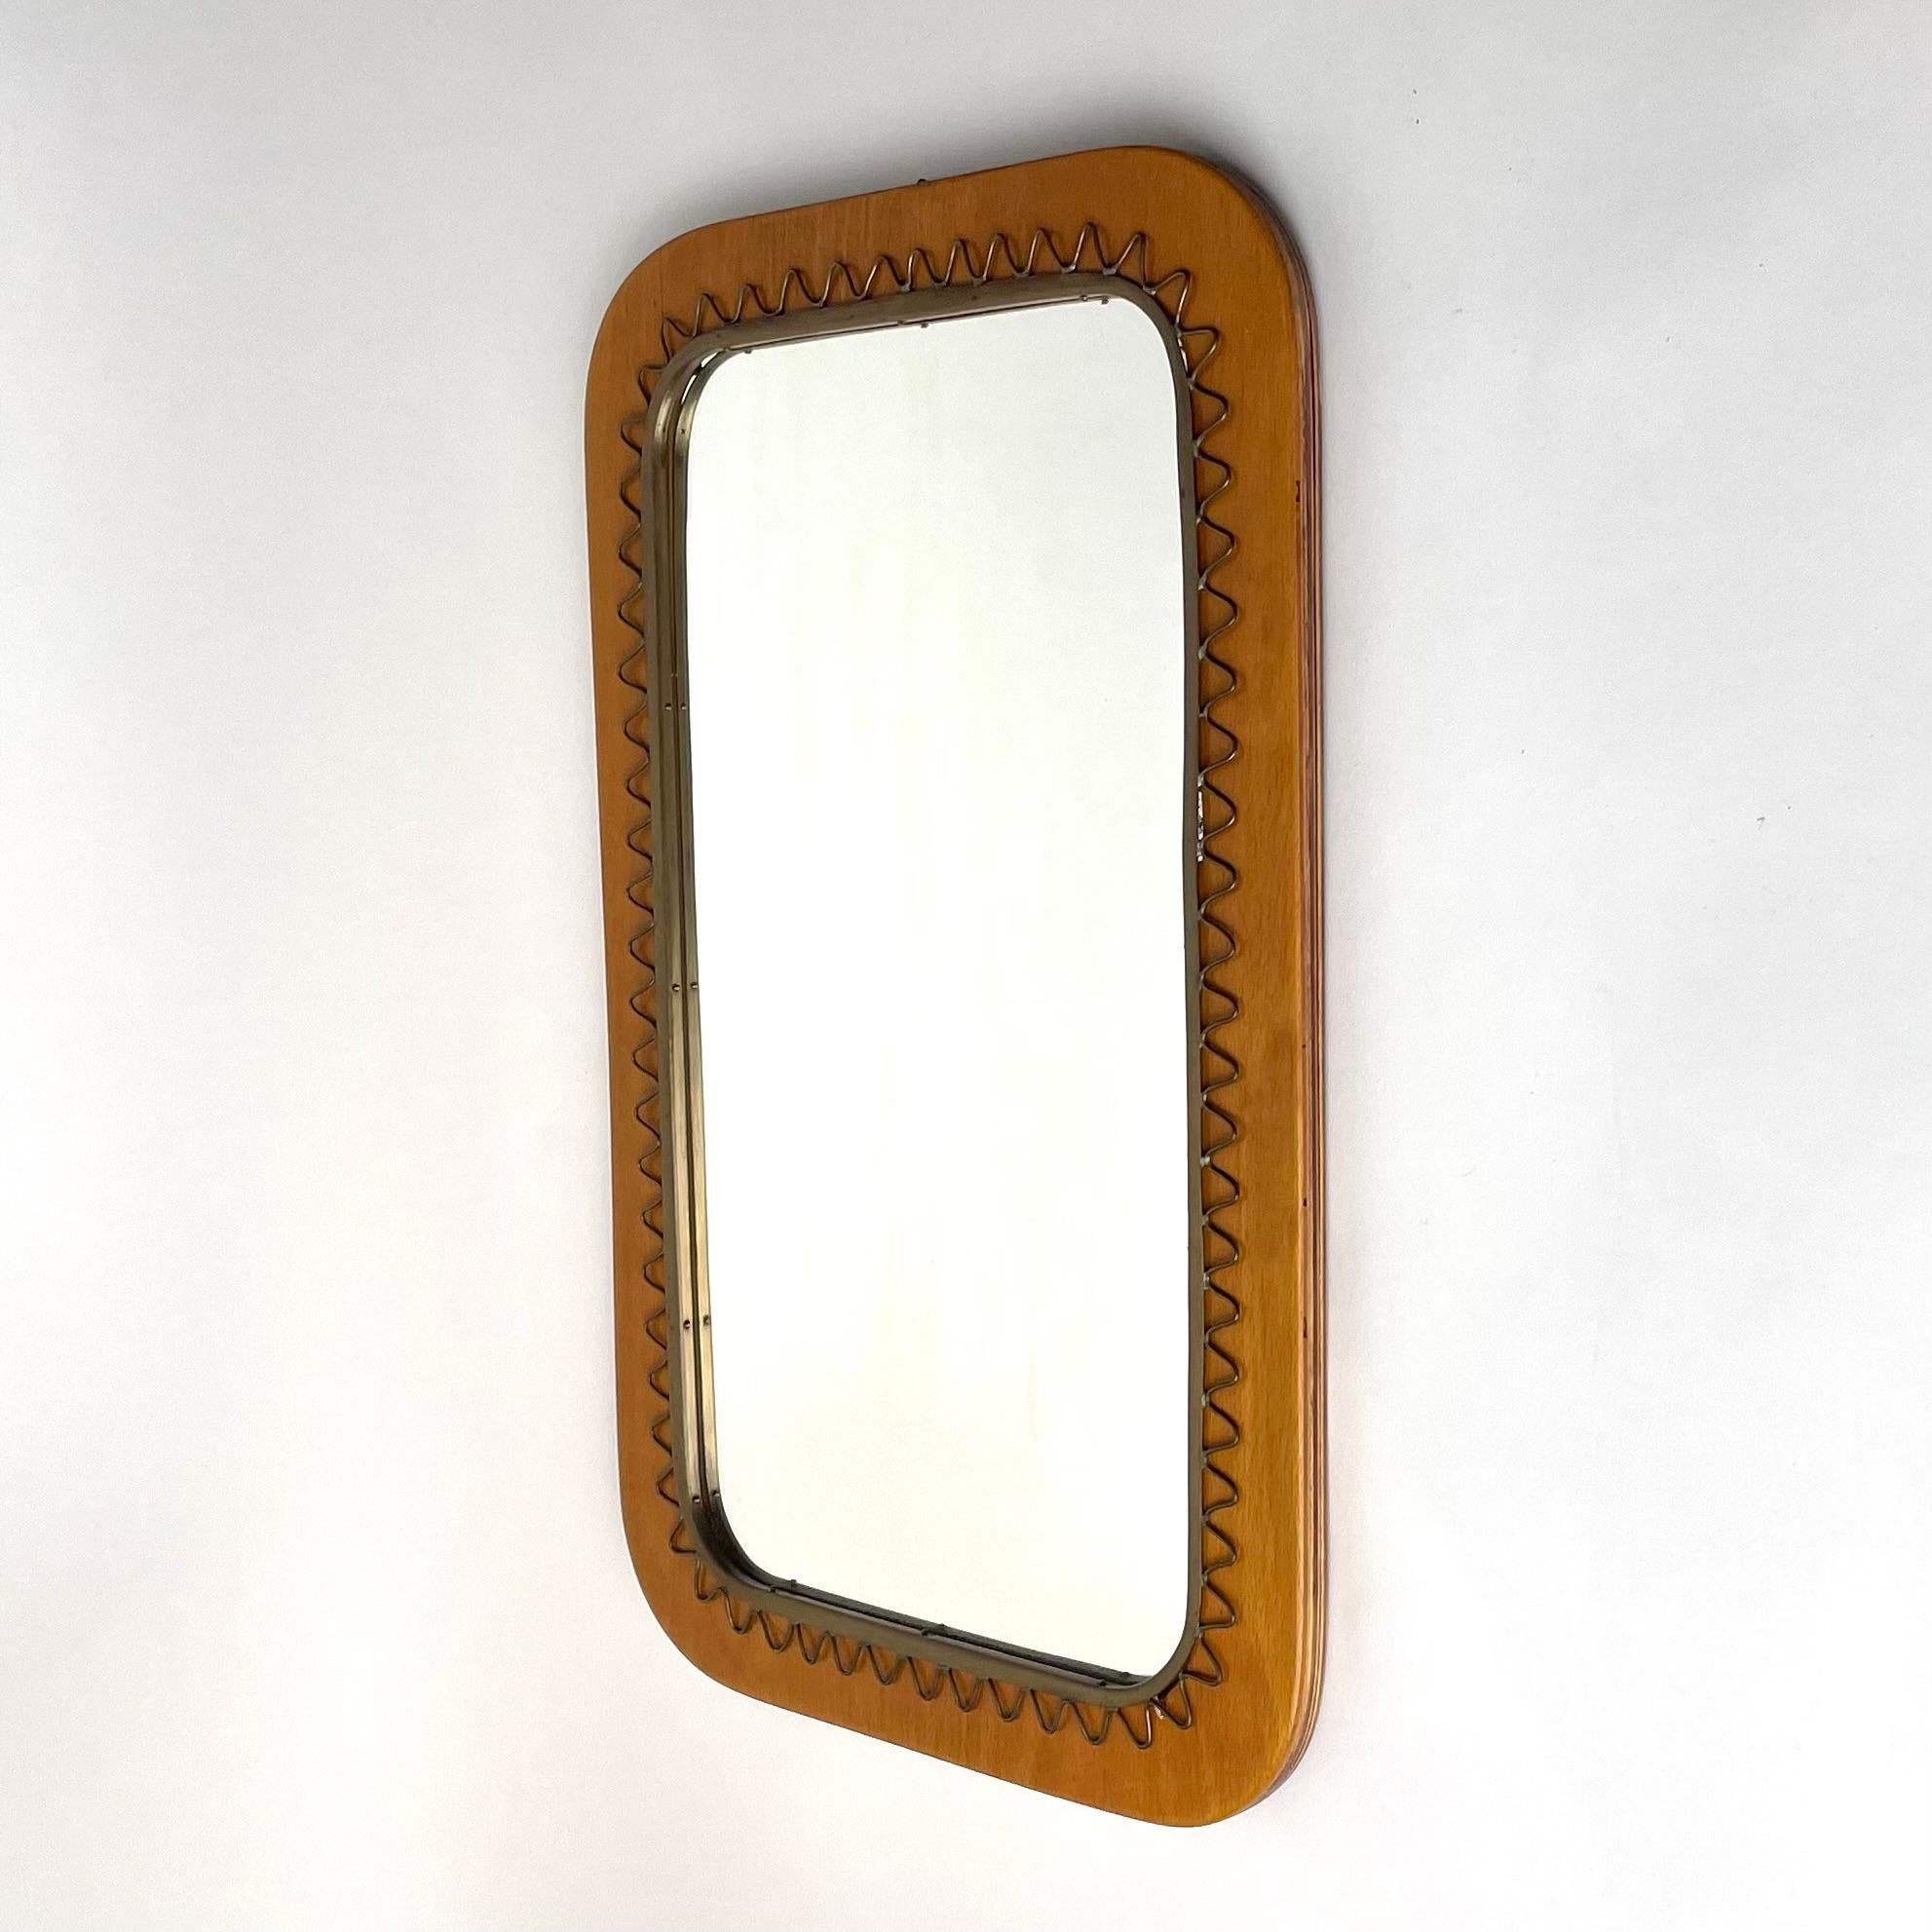 Beautiful mirror by Josef Frank, Firma Svenskt Tenn made during the Mid-20th Century.
The mirror is in beech with decoration in brass. Very rare model.

Josef Frank was born in Austria 1885 and died 1967 in Stockholm, Sweden. He is one of Sweden`s